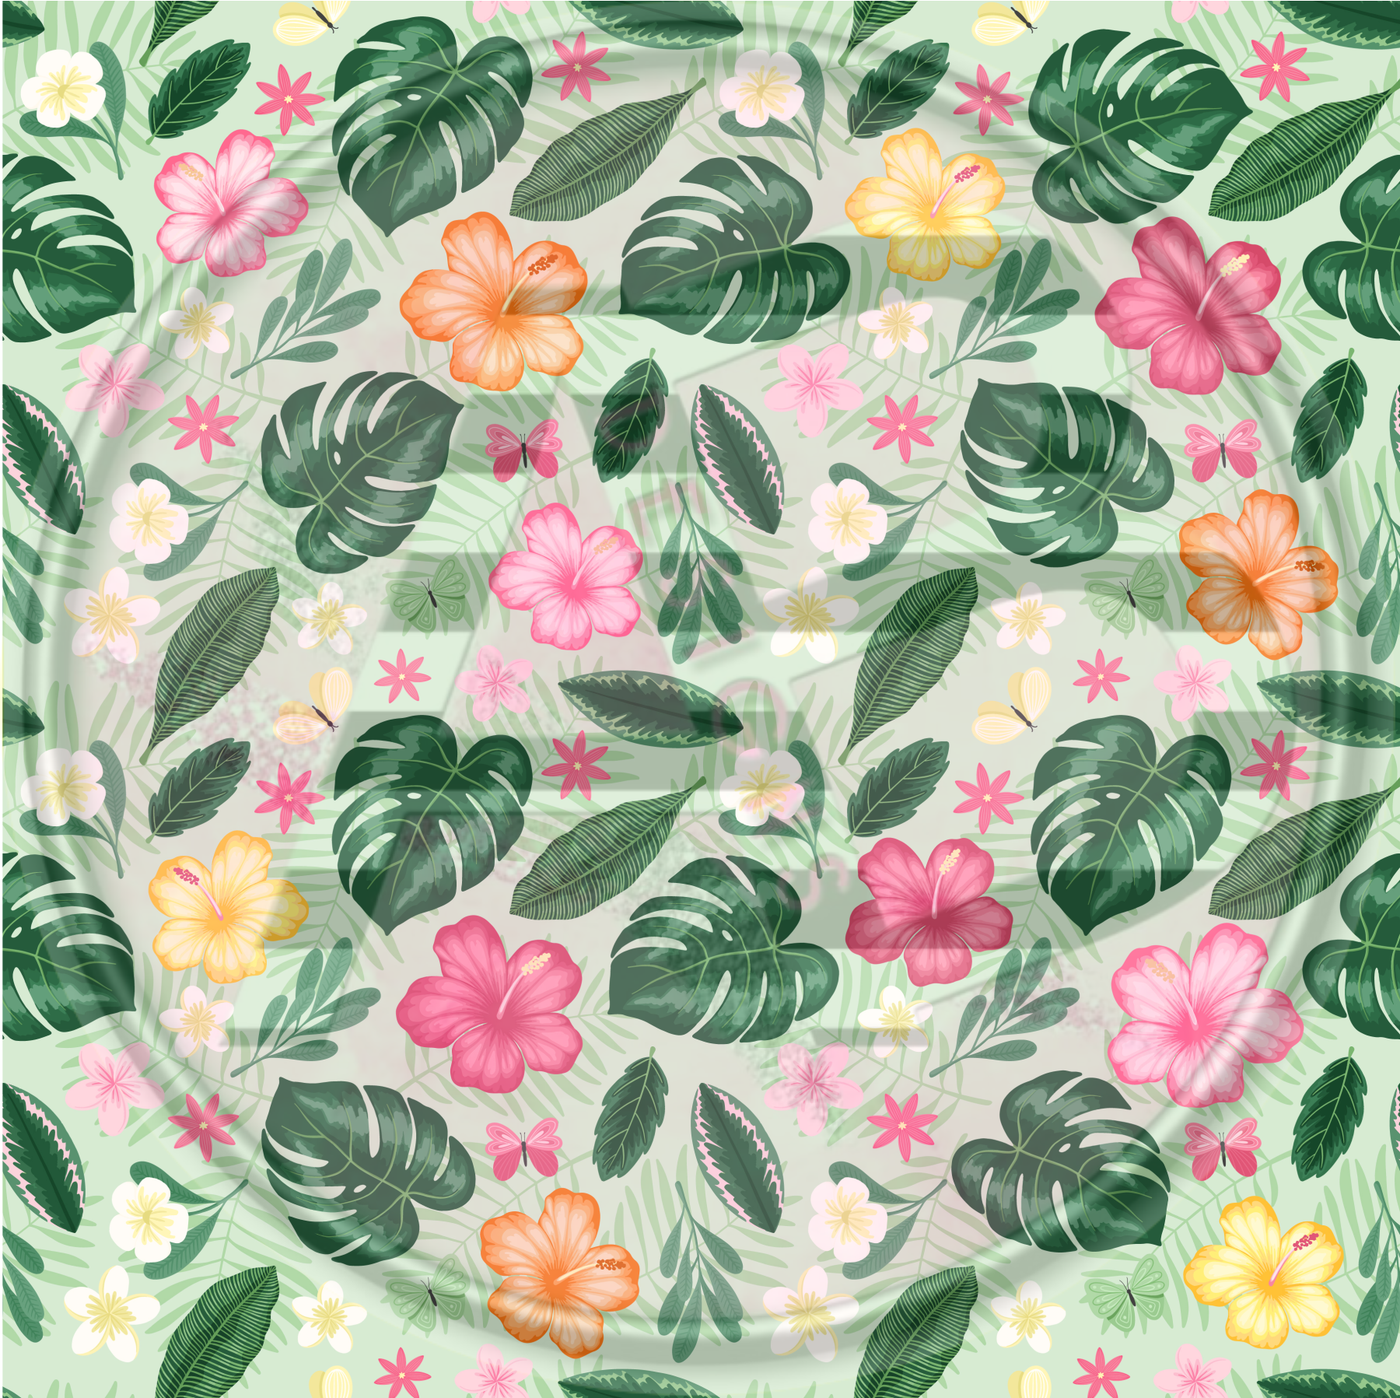 Adhesive Patterned Vinyl - Tropical Exotic Floral 39